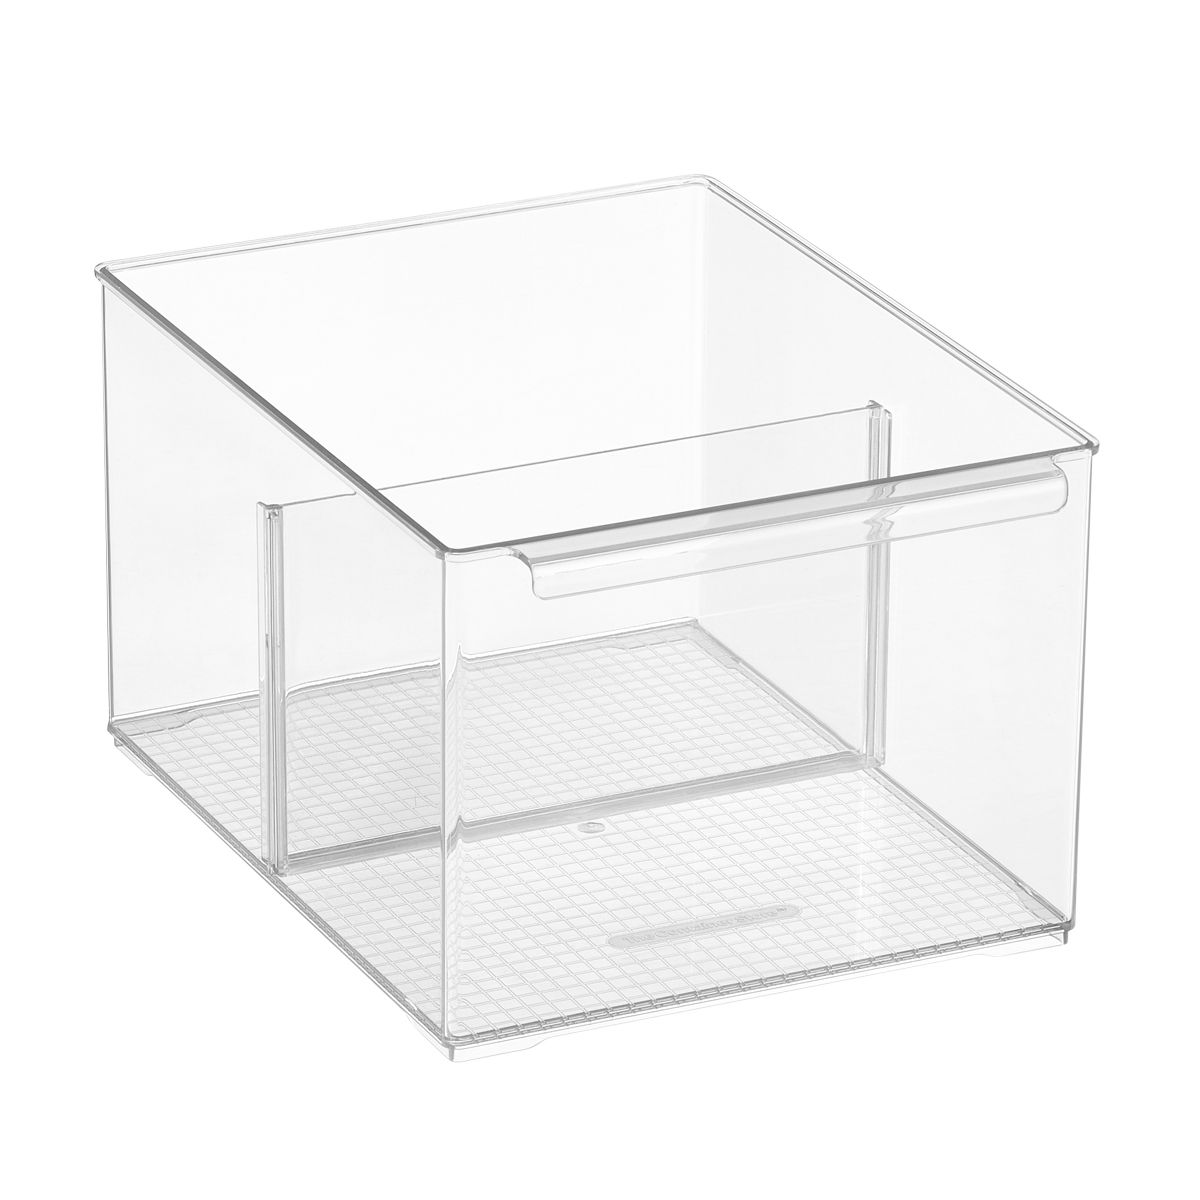 Everything Organizer Large Cabinet Depth Pantry Bin w/ Divider ClearSKU:100871645.08 Reviews | The Container Store